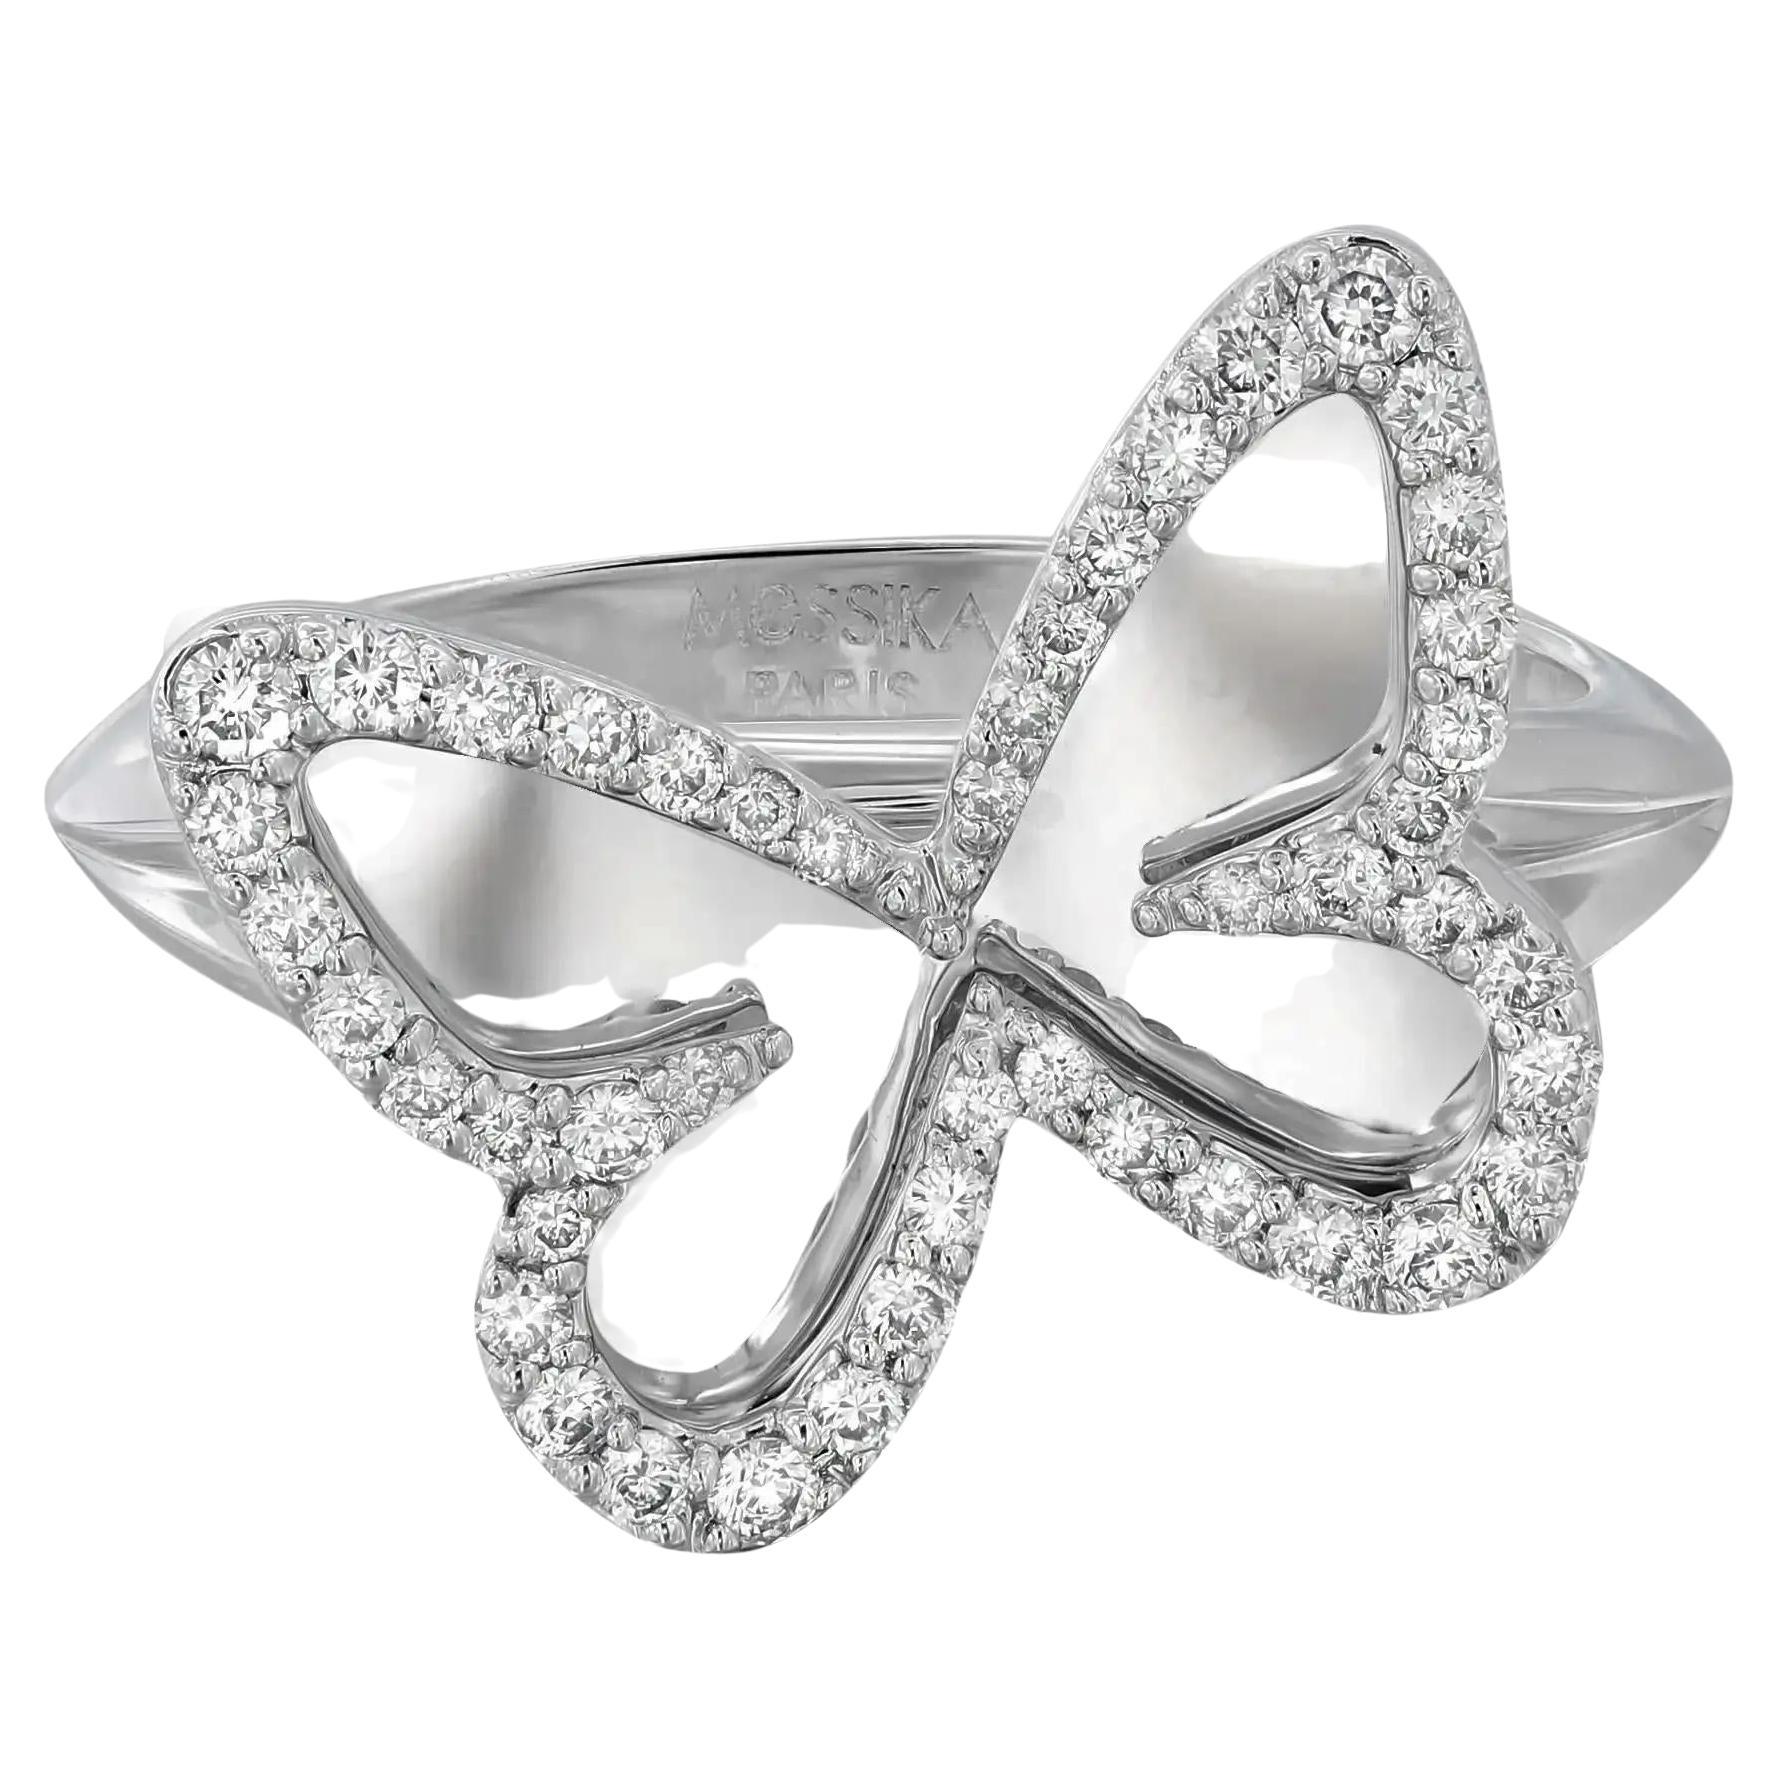 Messika 0.27Cttw Plaque Butterfly Diamond Ring 18K White Gold Size 53 US 6.5 For Sale